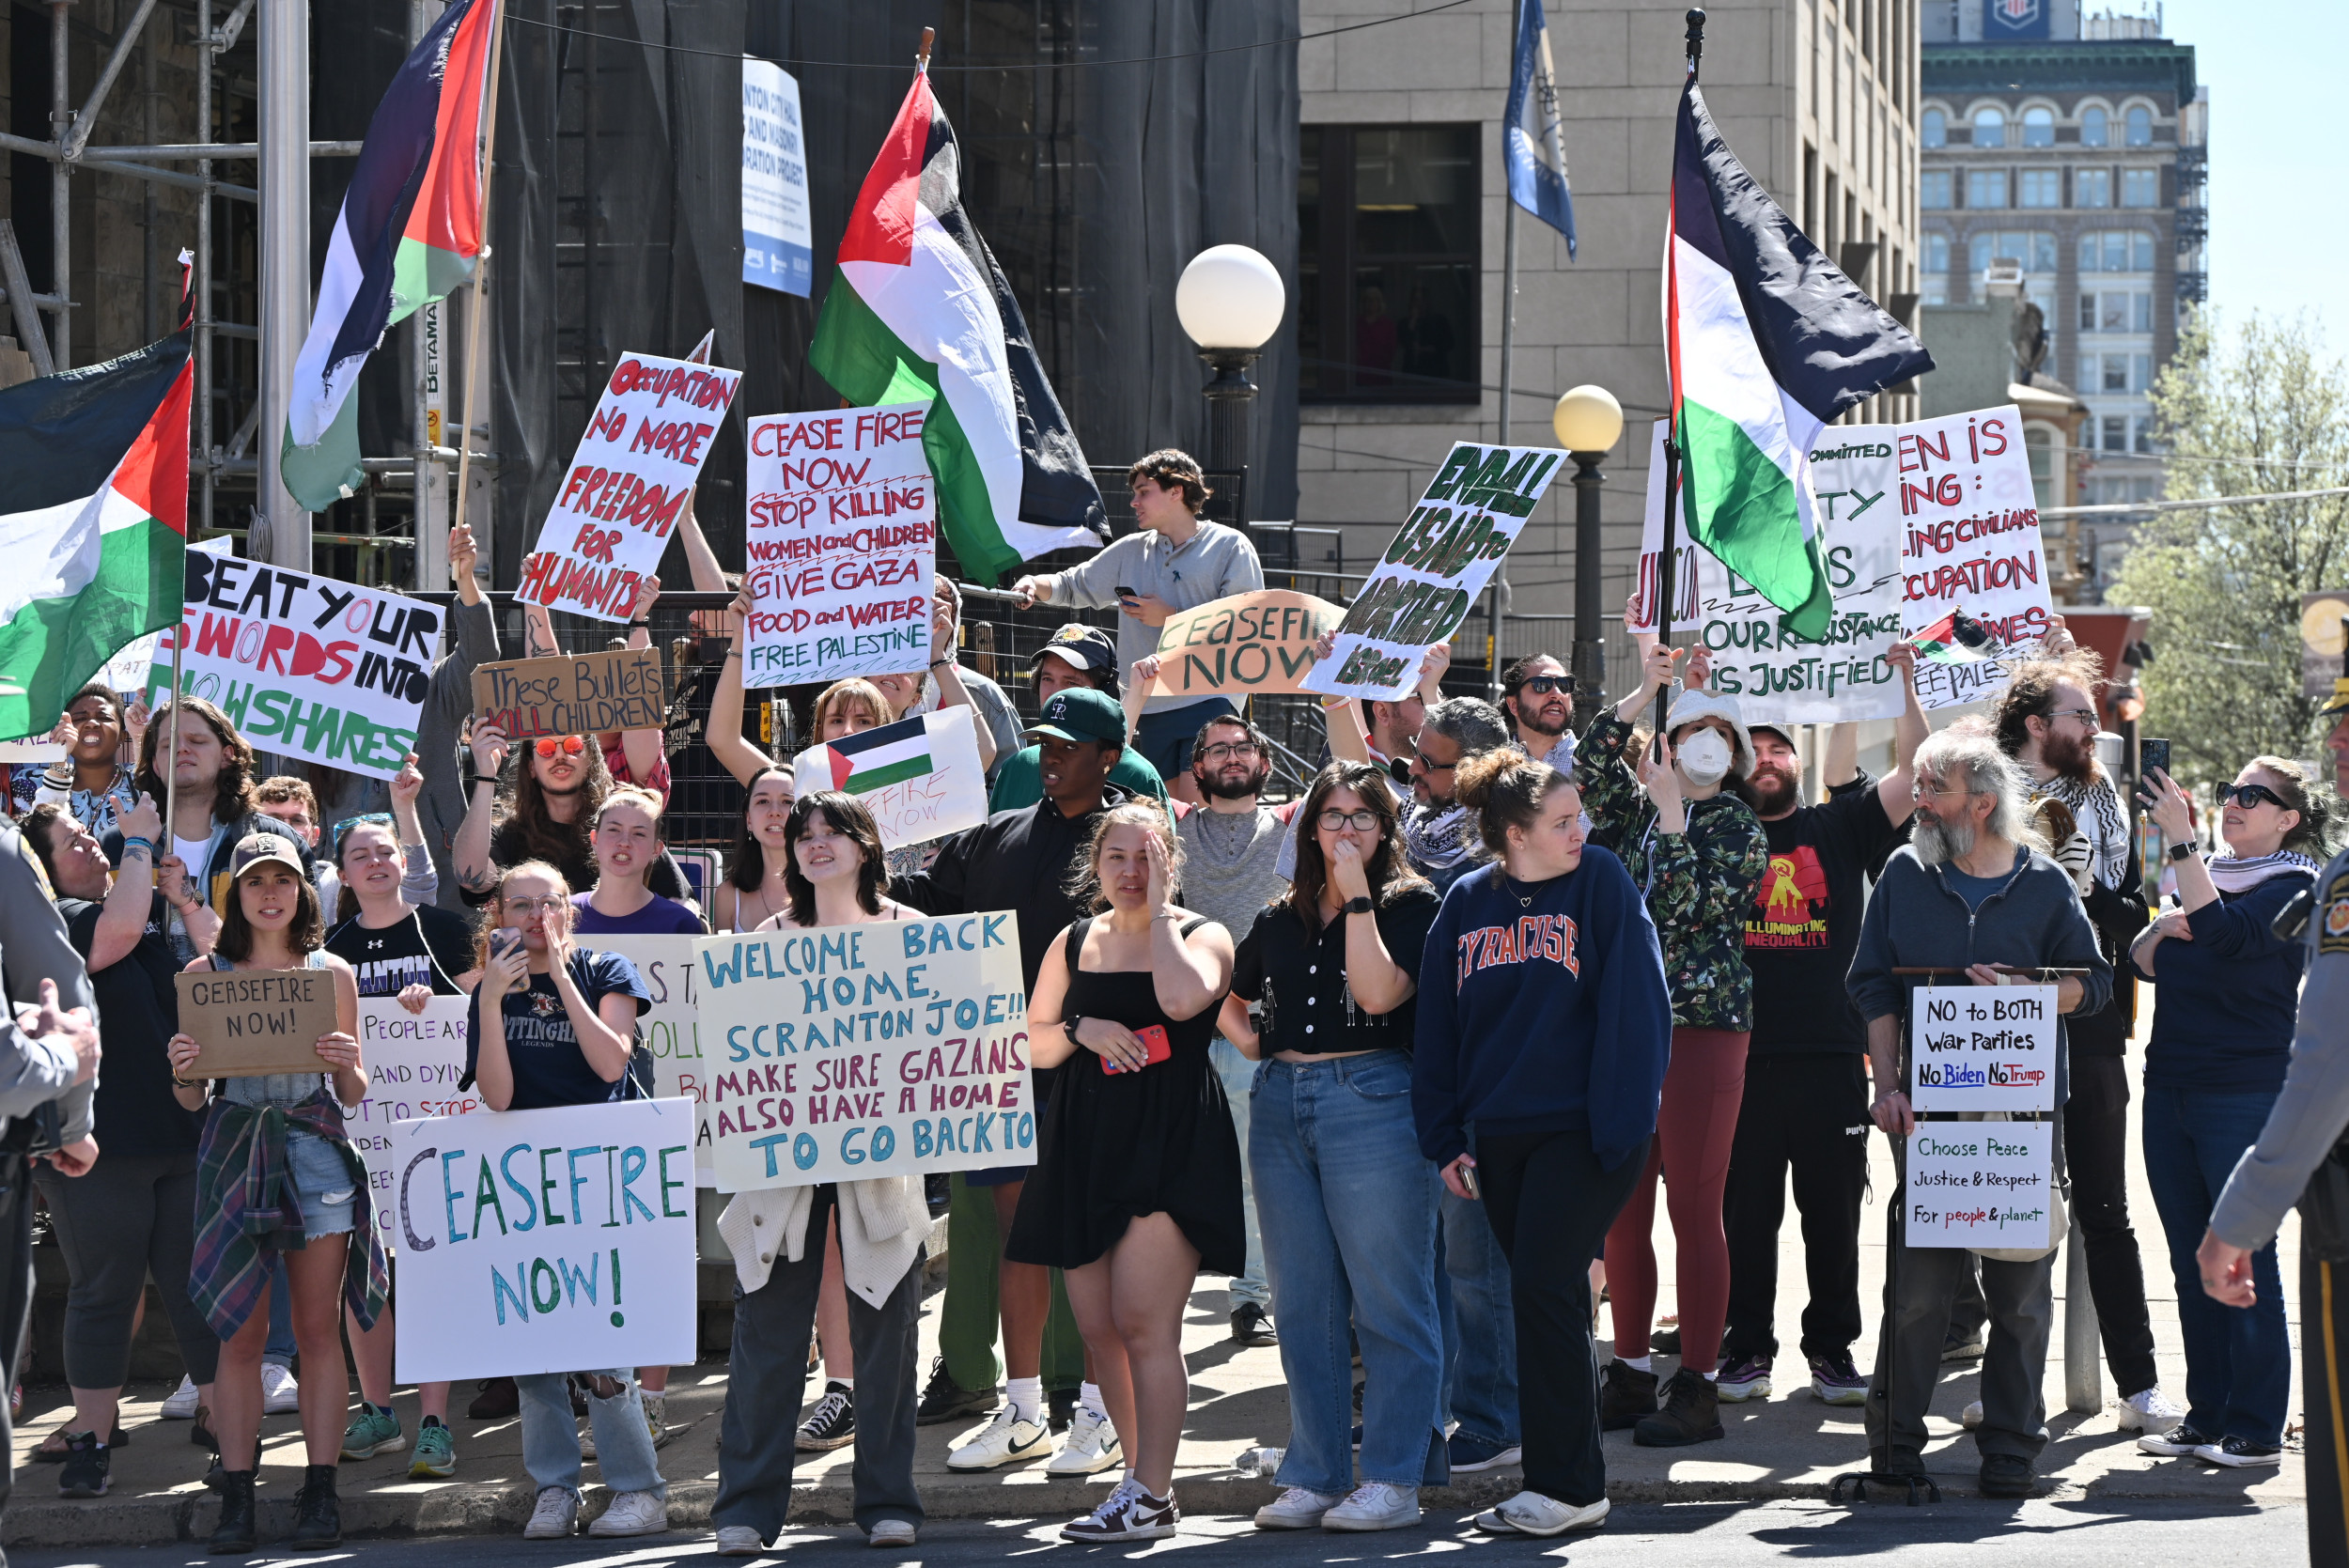 Anti-Israel Protesters Confused About Meaning of ‘Ceasefire’